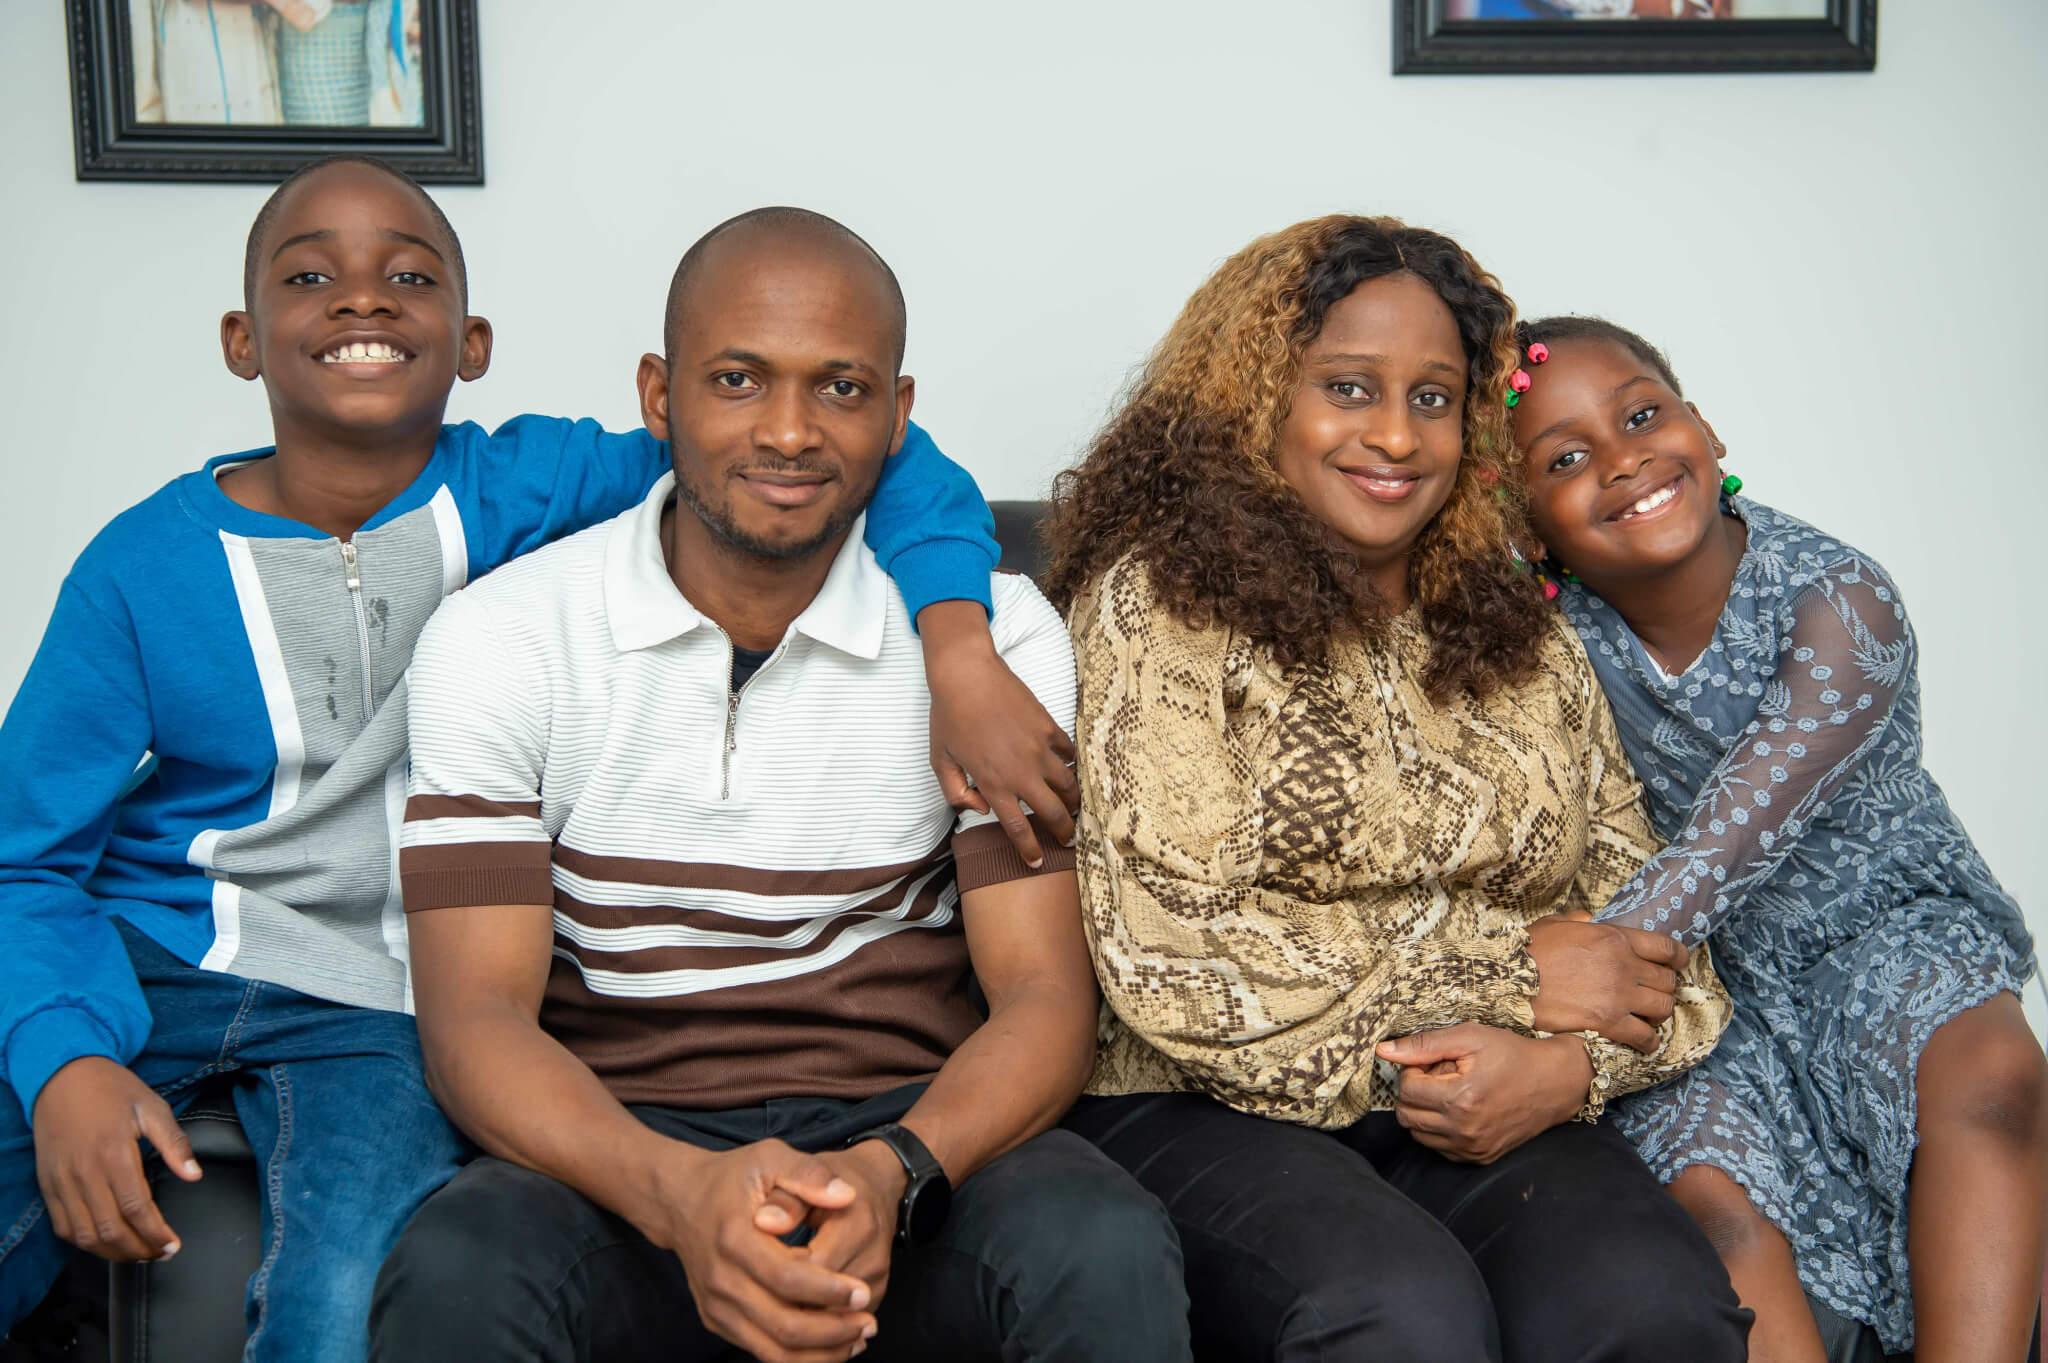 Olufemi and Adeola with their children